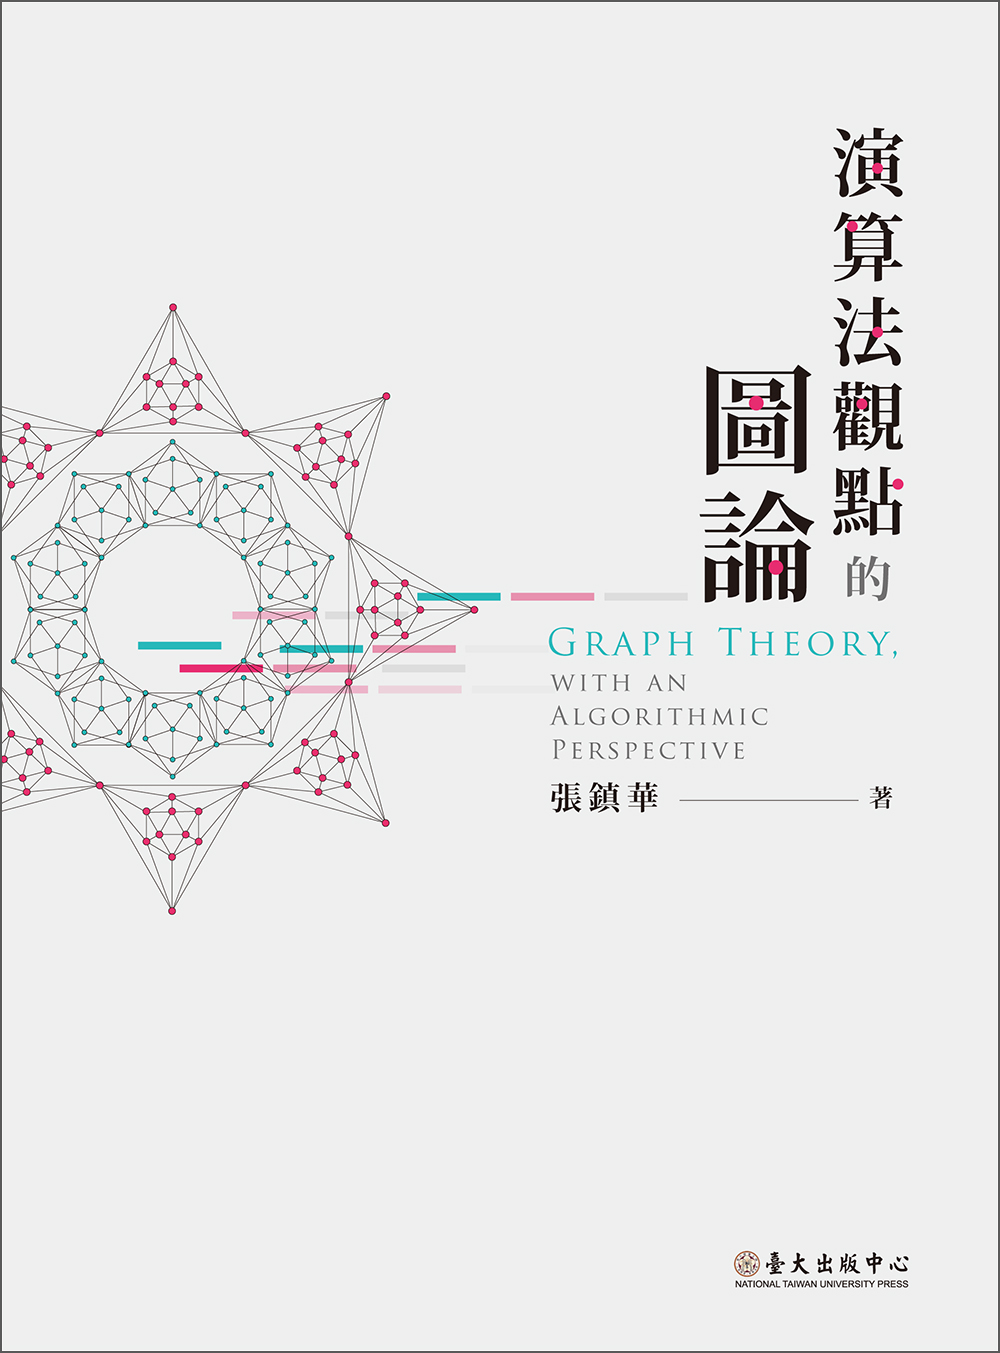 Graph Theory, with an Algorithmic Perspective